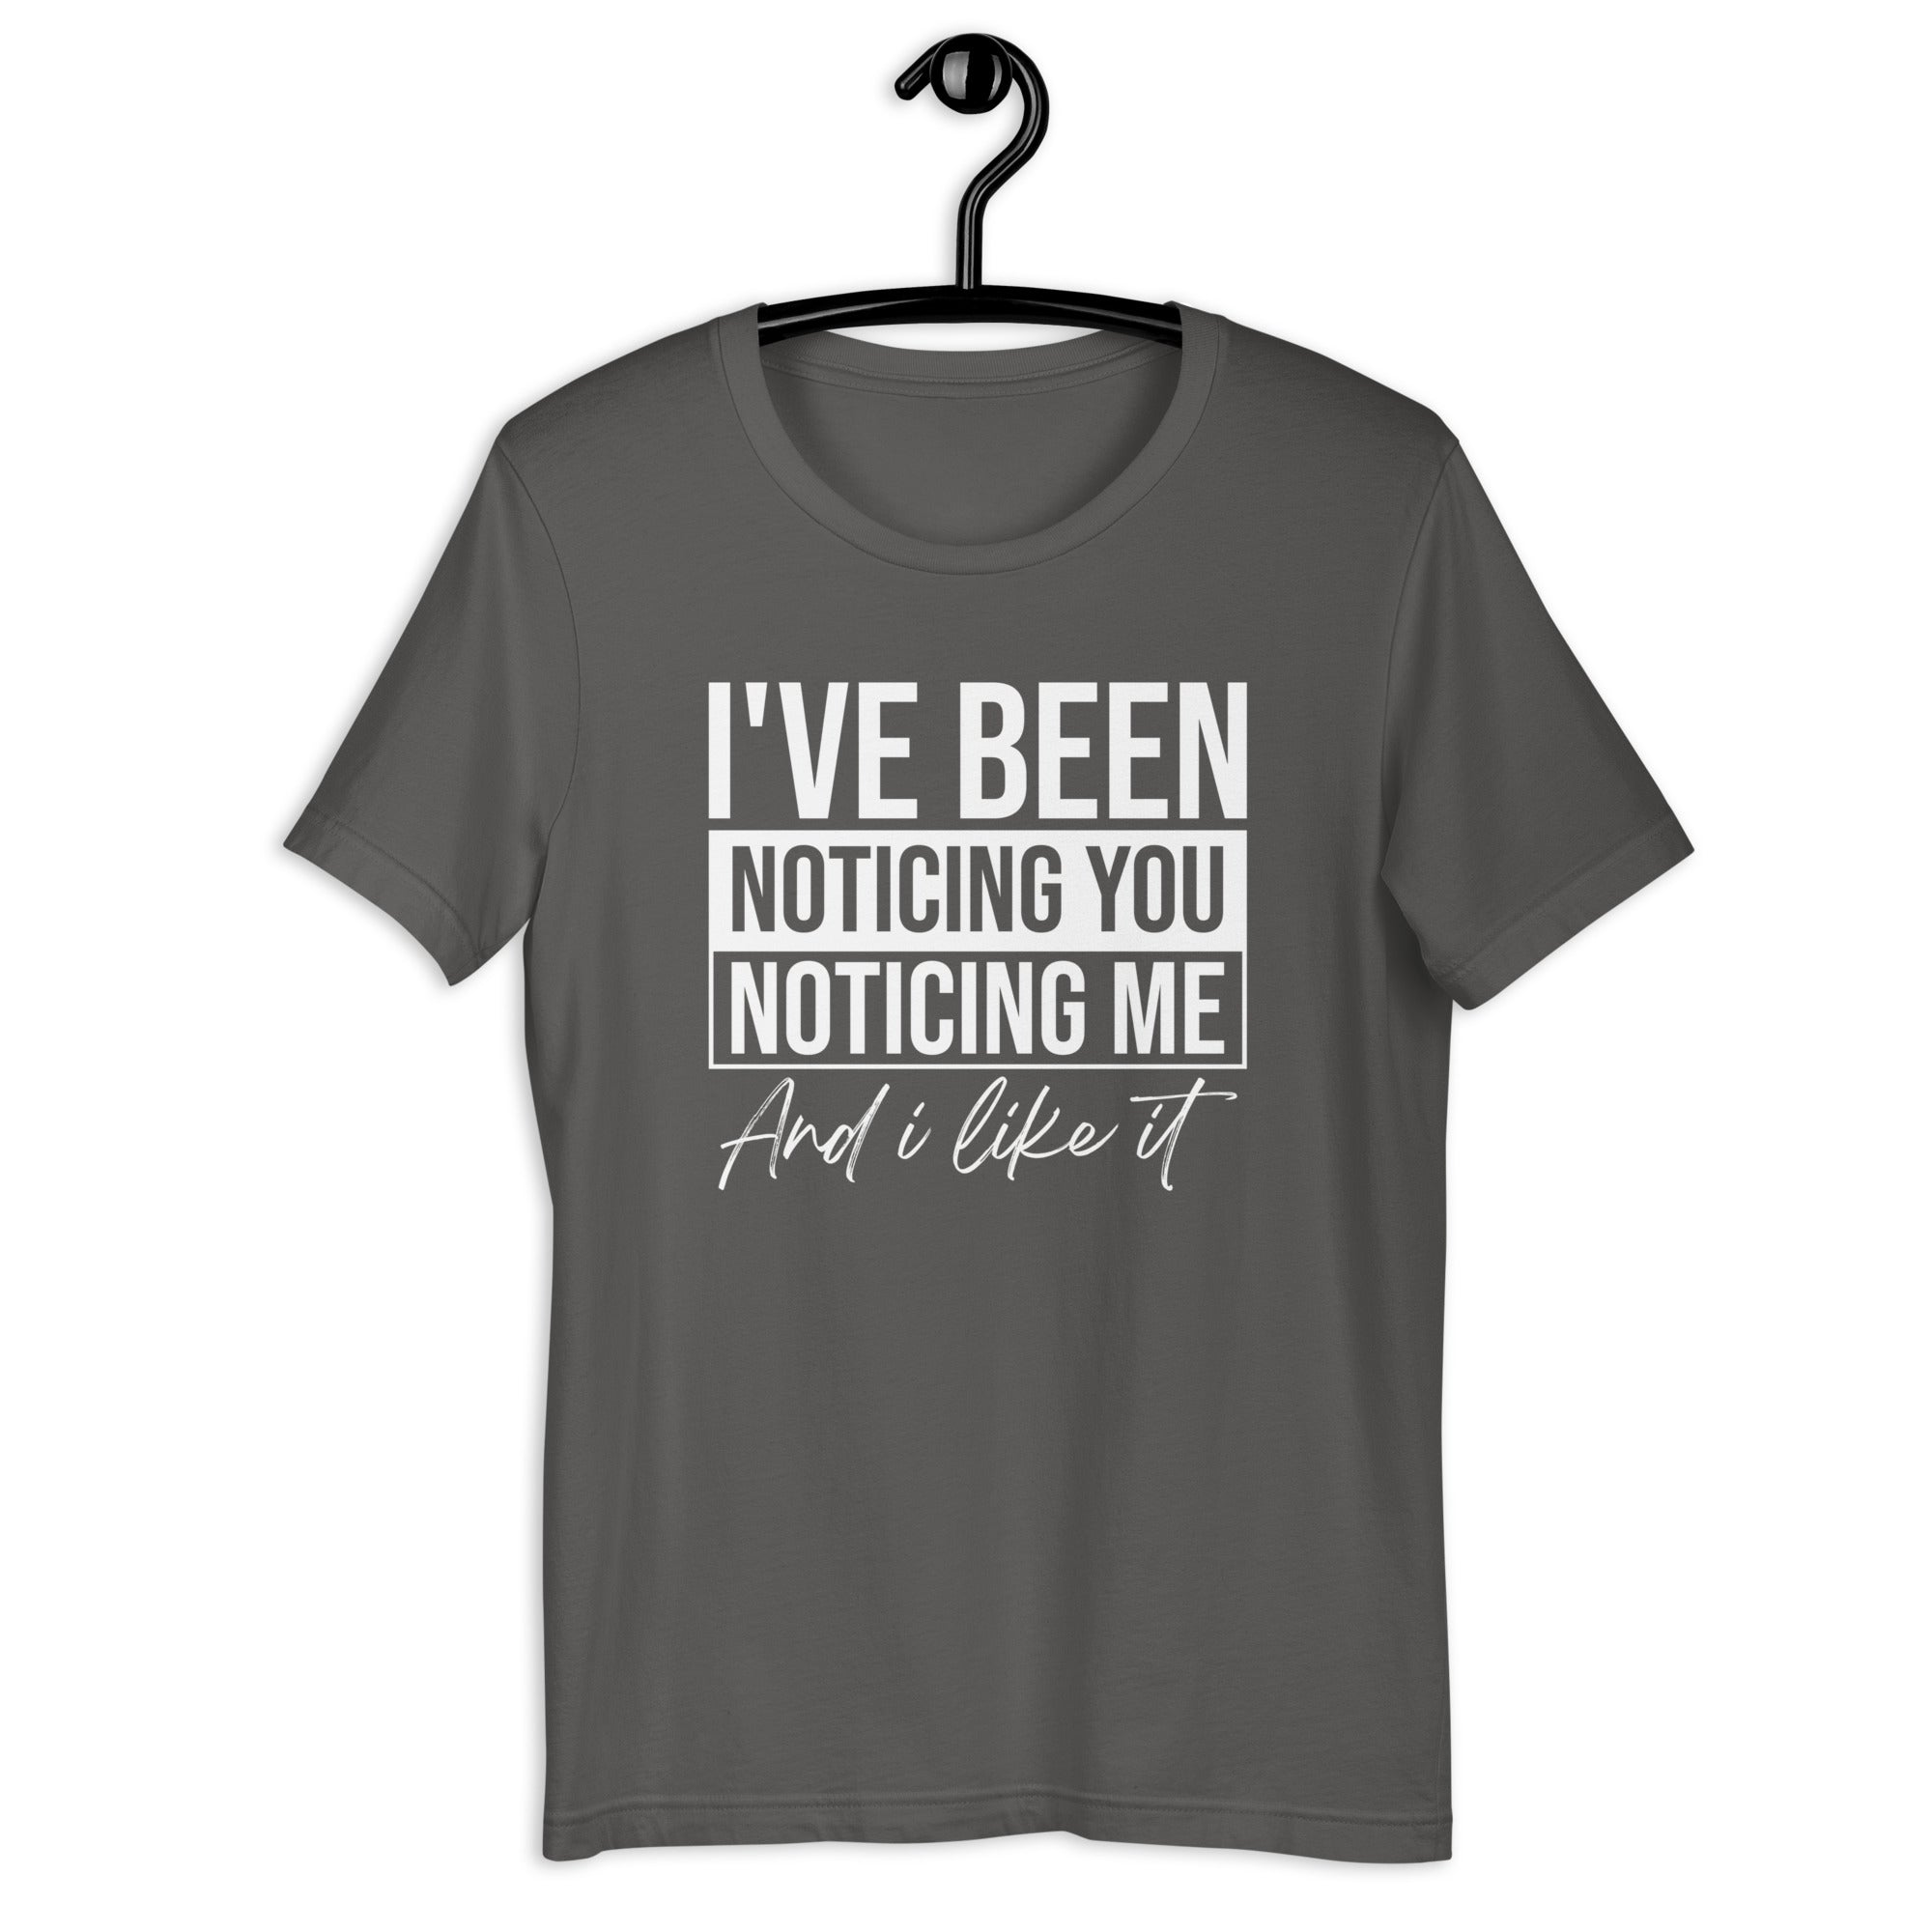 Unisex t-shirt | I've been noticing you noticing me and I like it